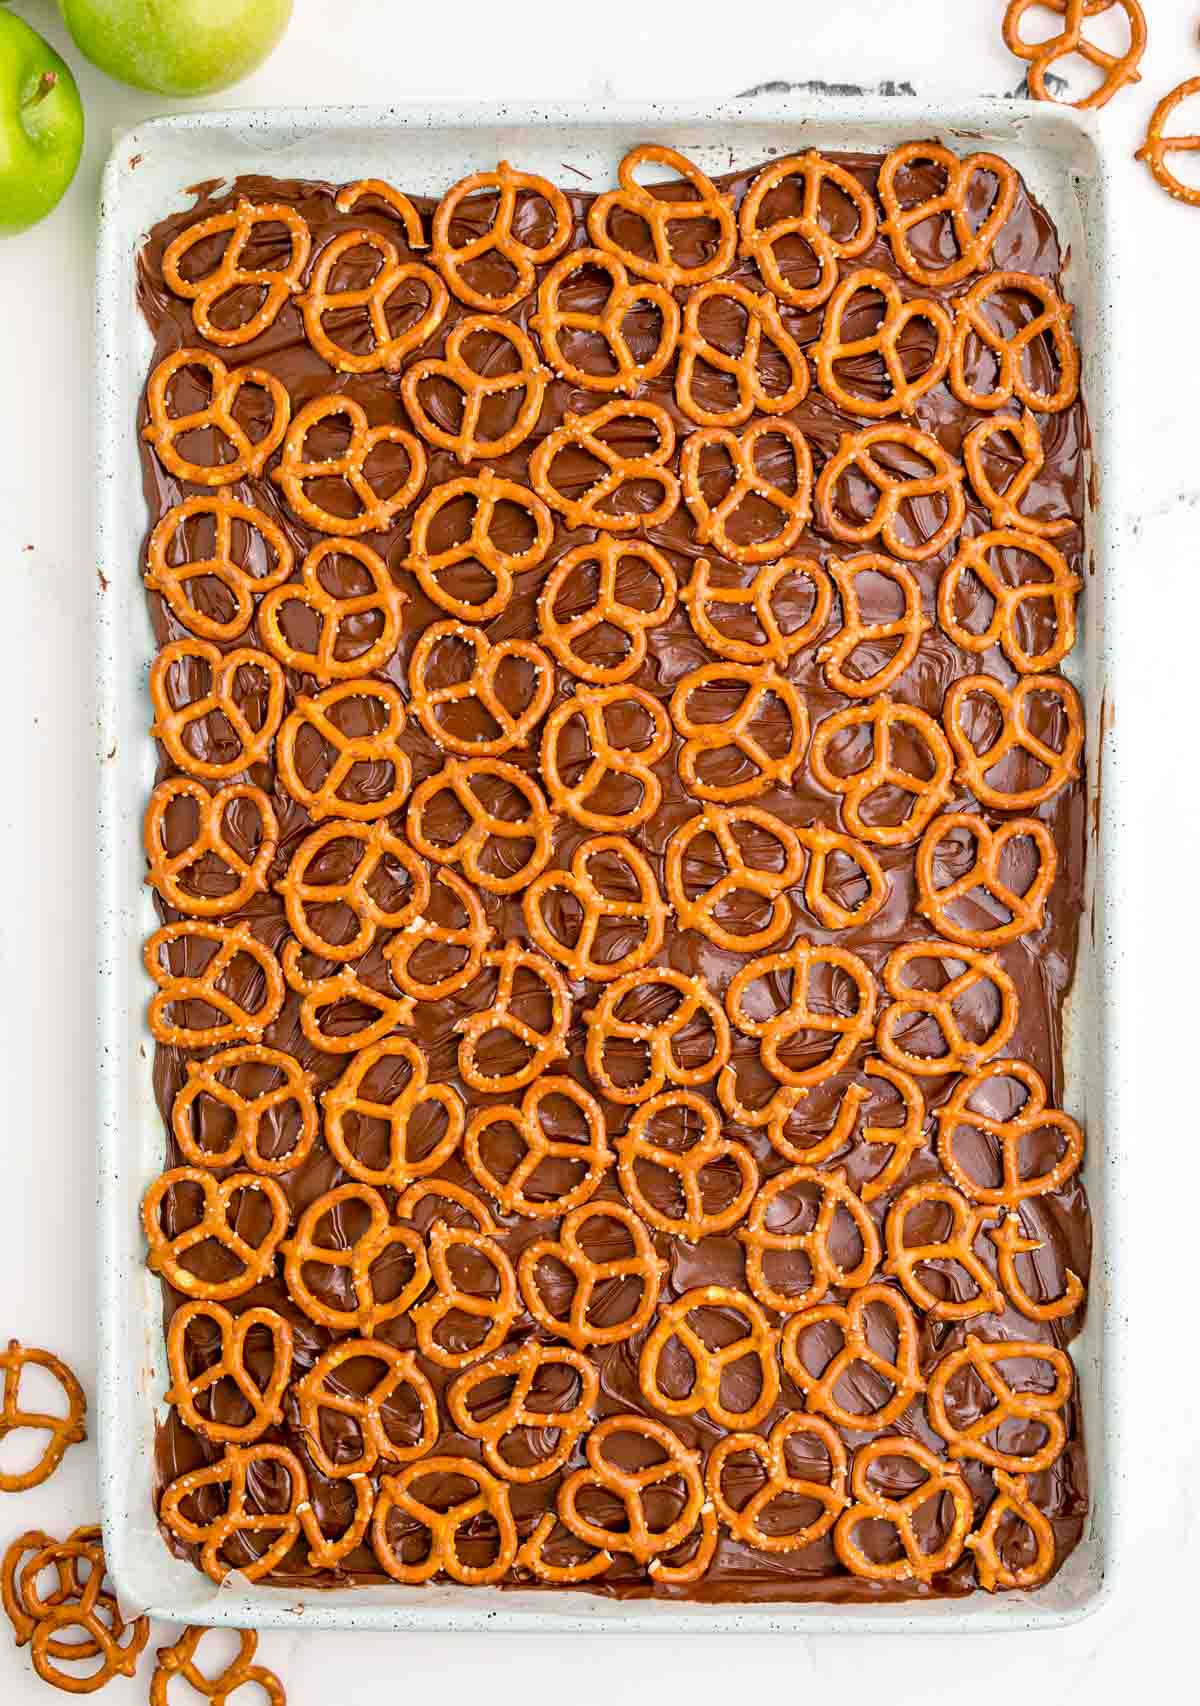 melted chocolate topped with pretzels